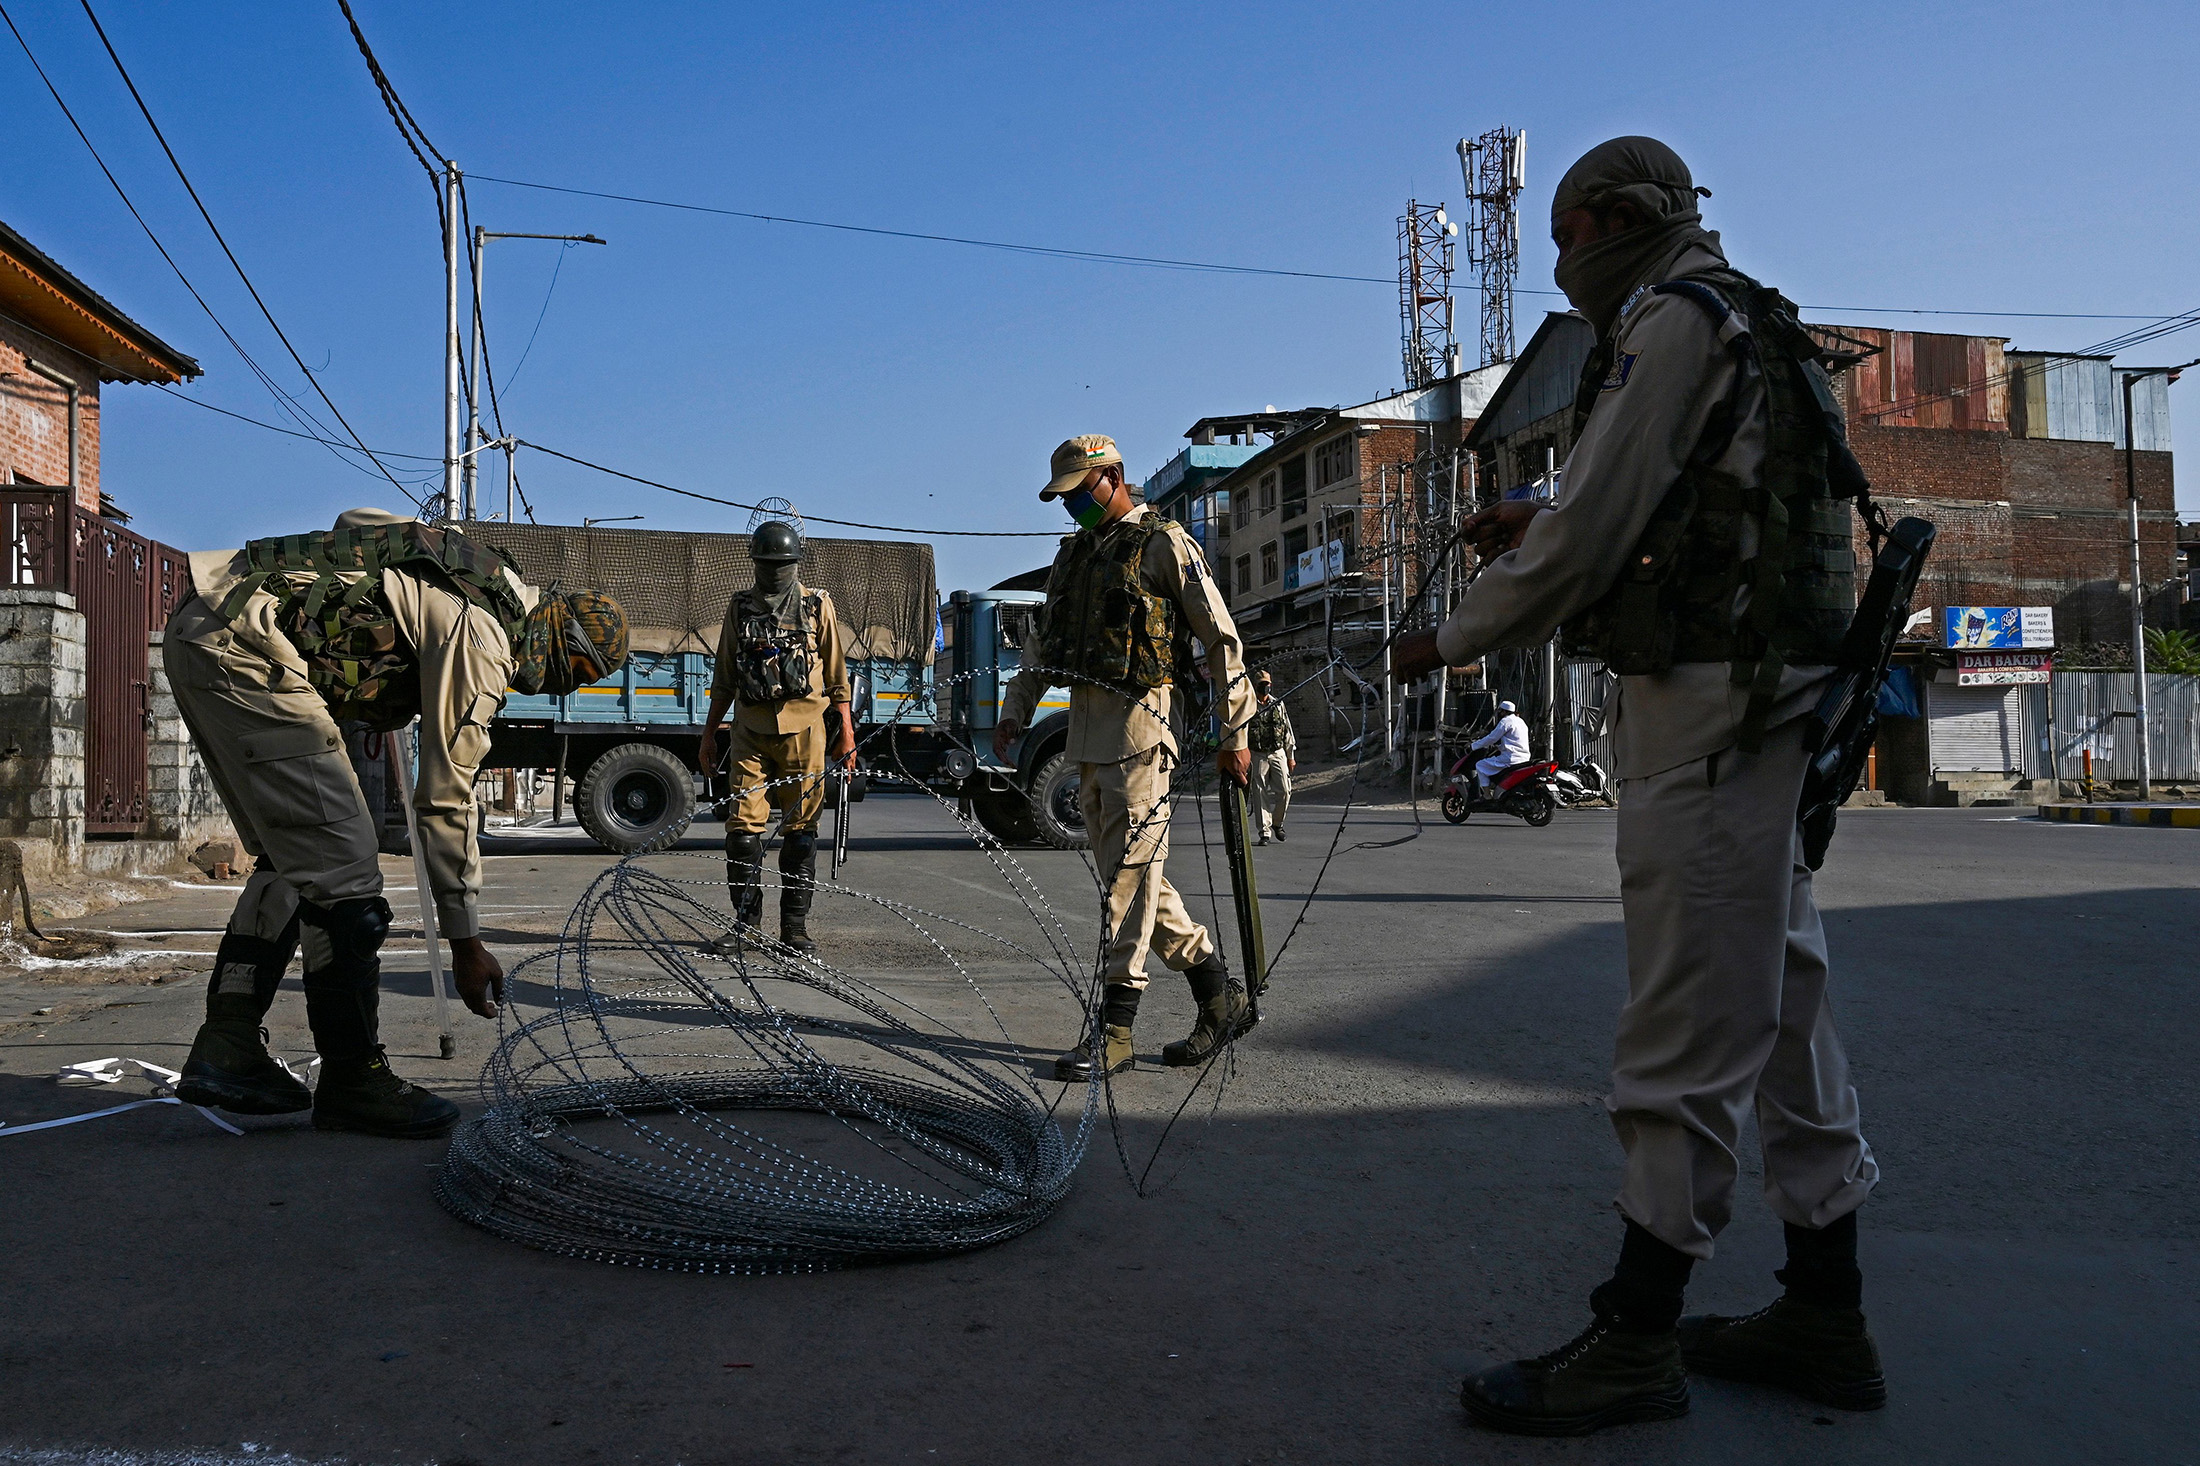 Paramilitary soldiers set up a roll of barbed wire at a checkpoint during curfew in Srinagar on August 4.